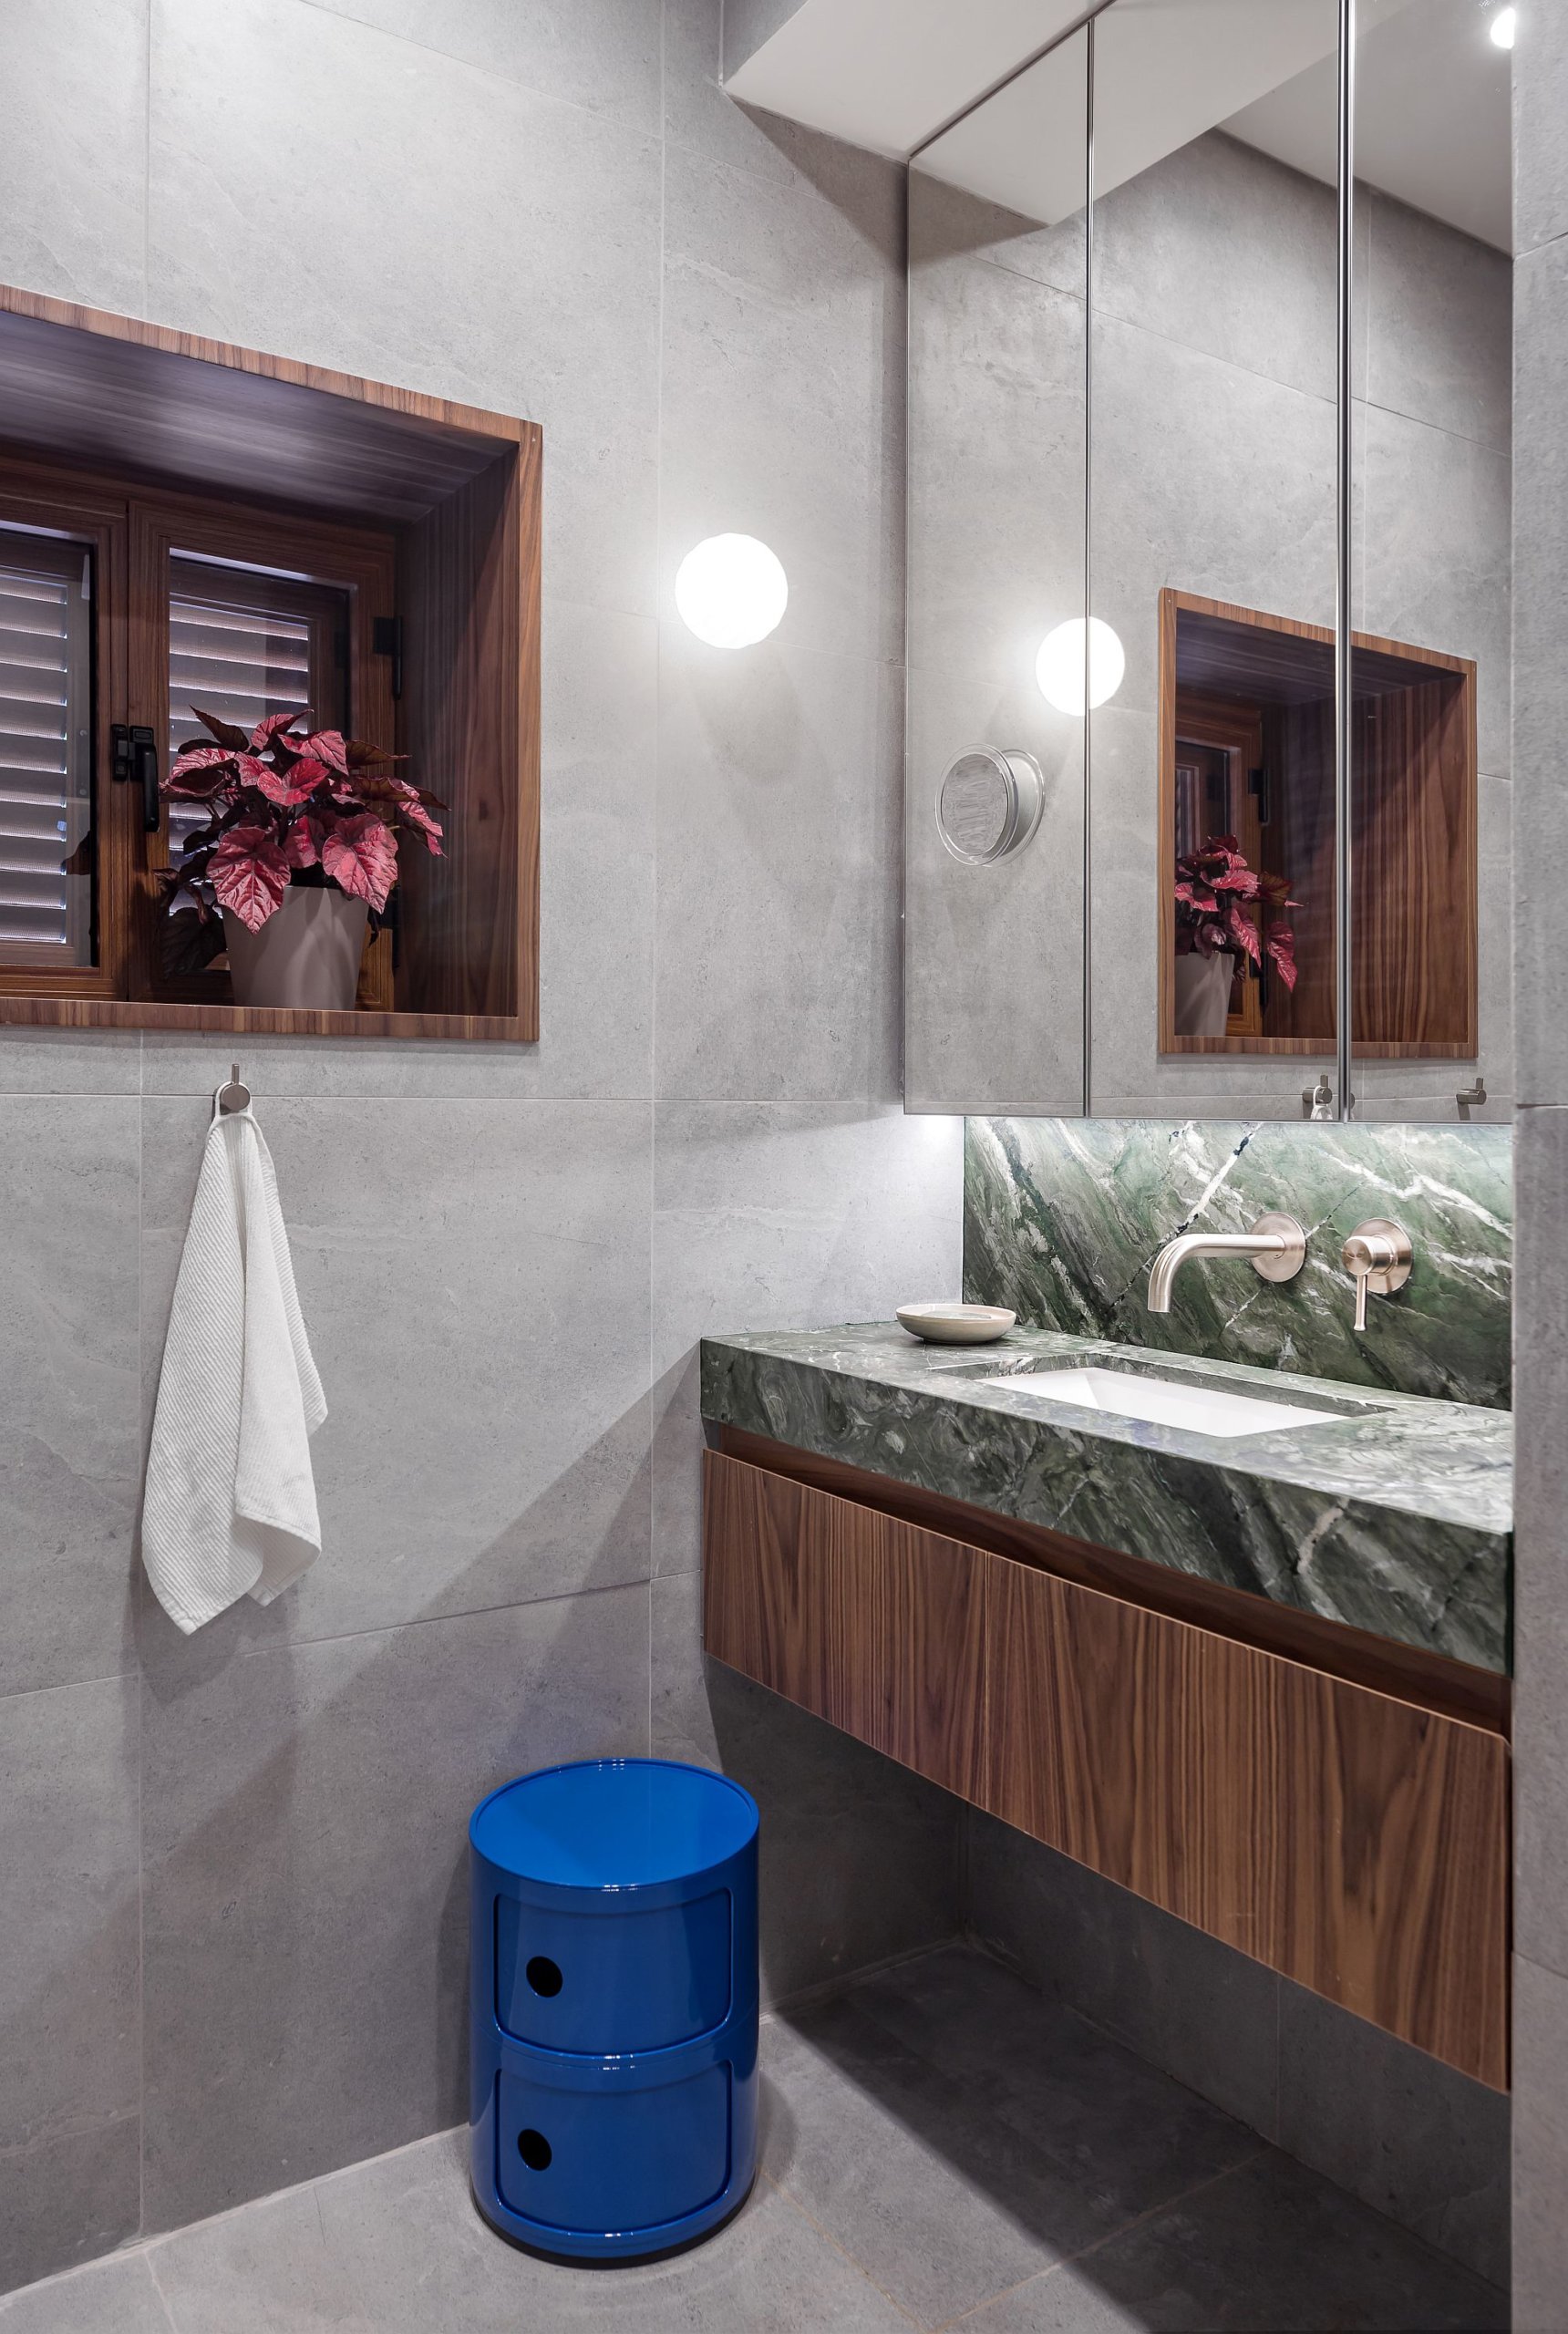 Picasso Green marble countertops in the bathroom steal the spotlight